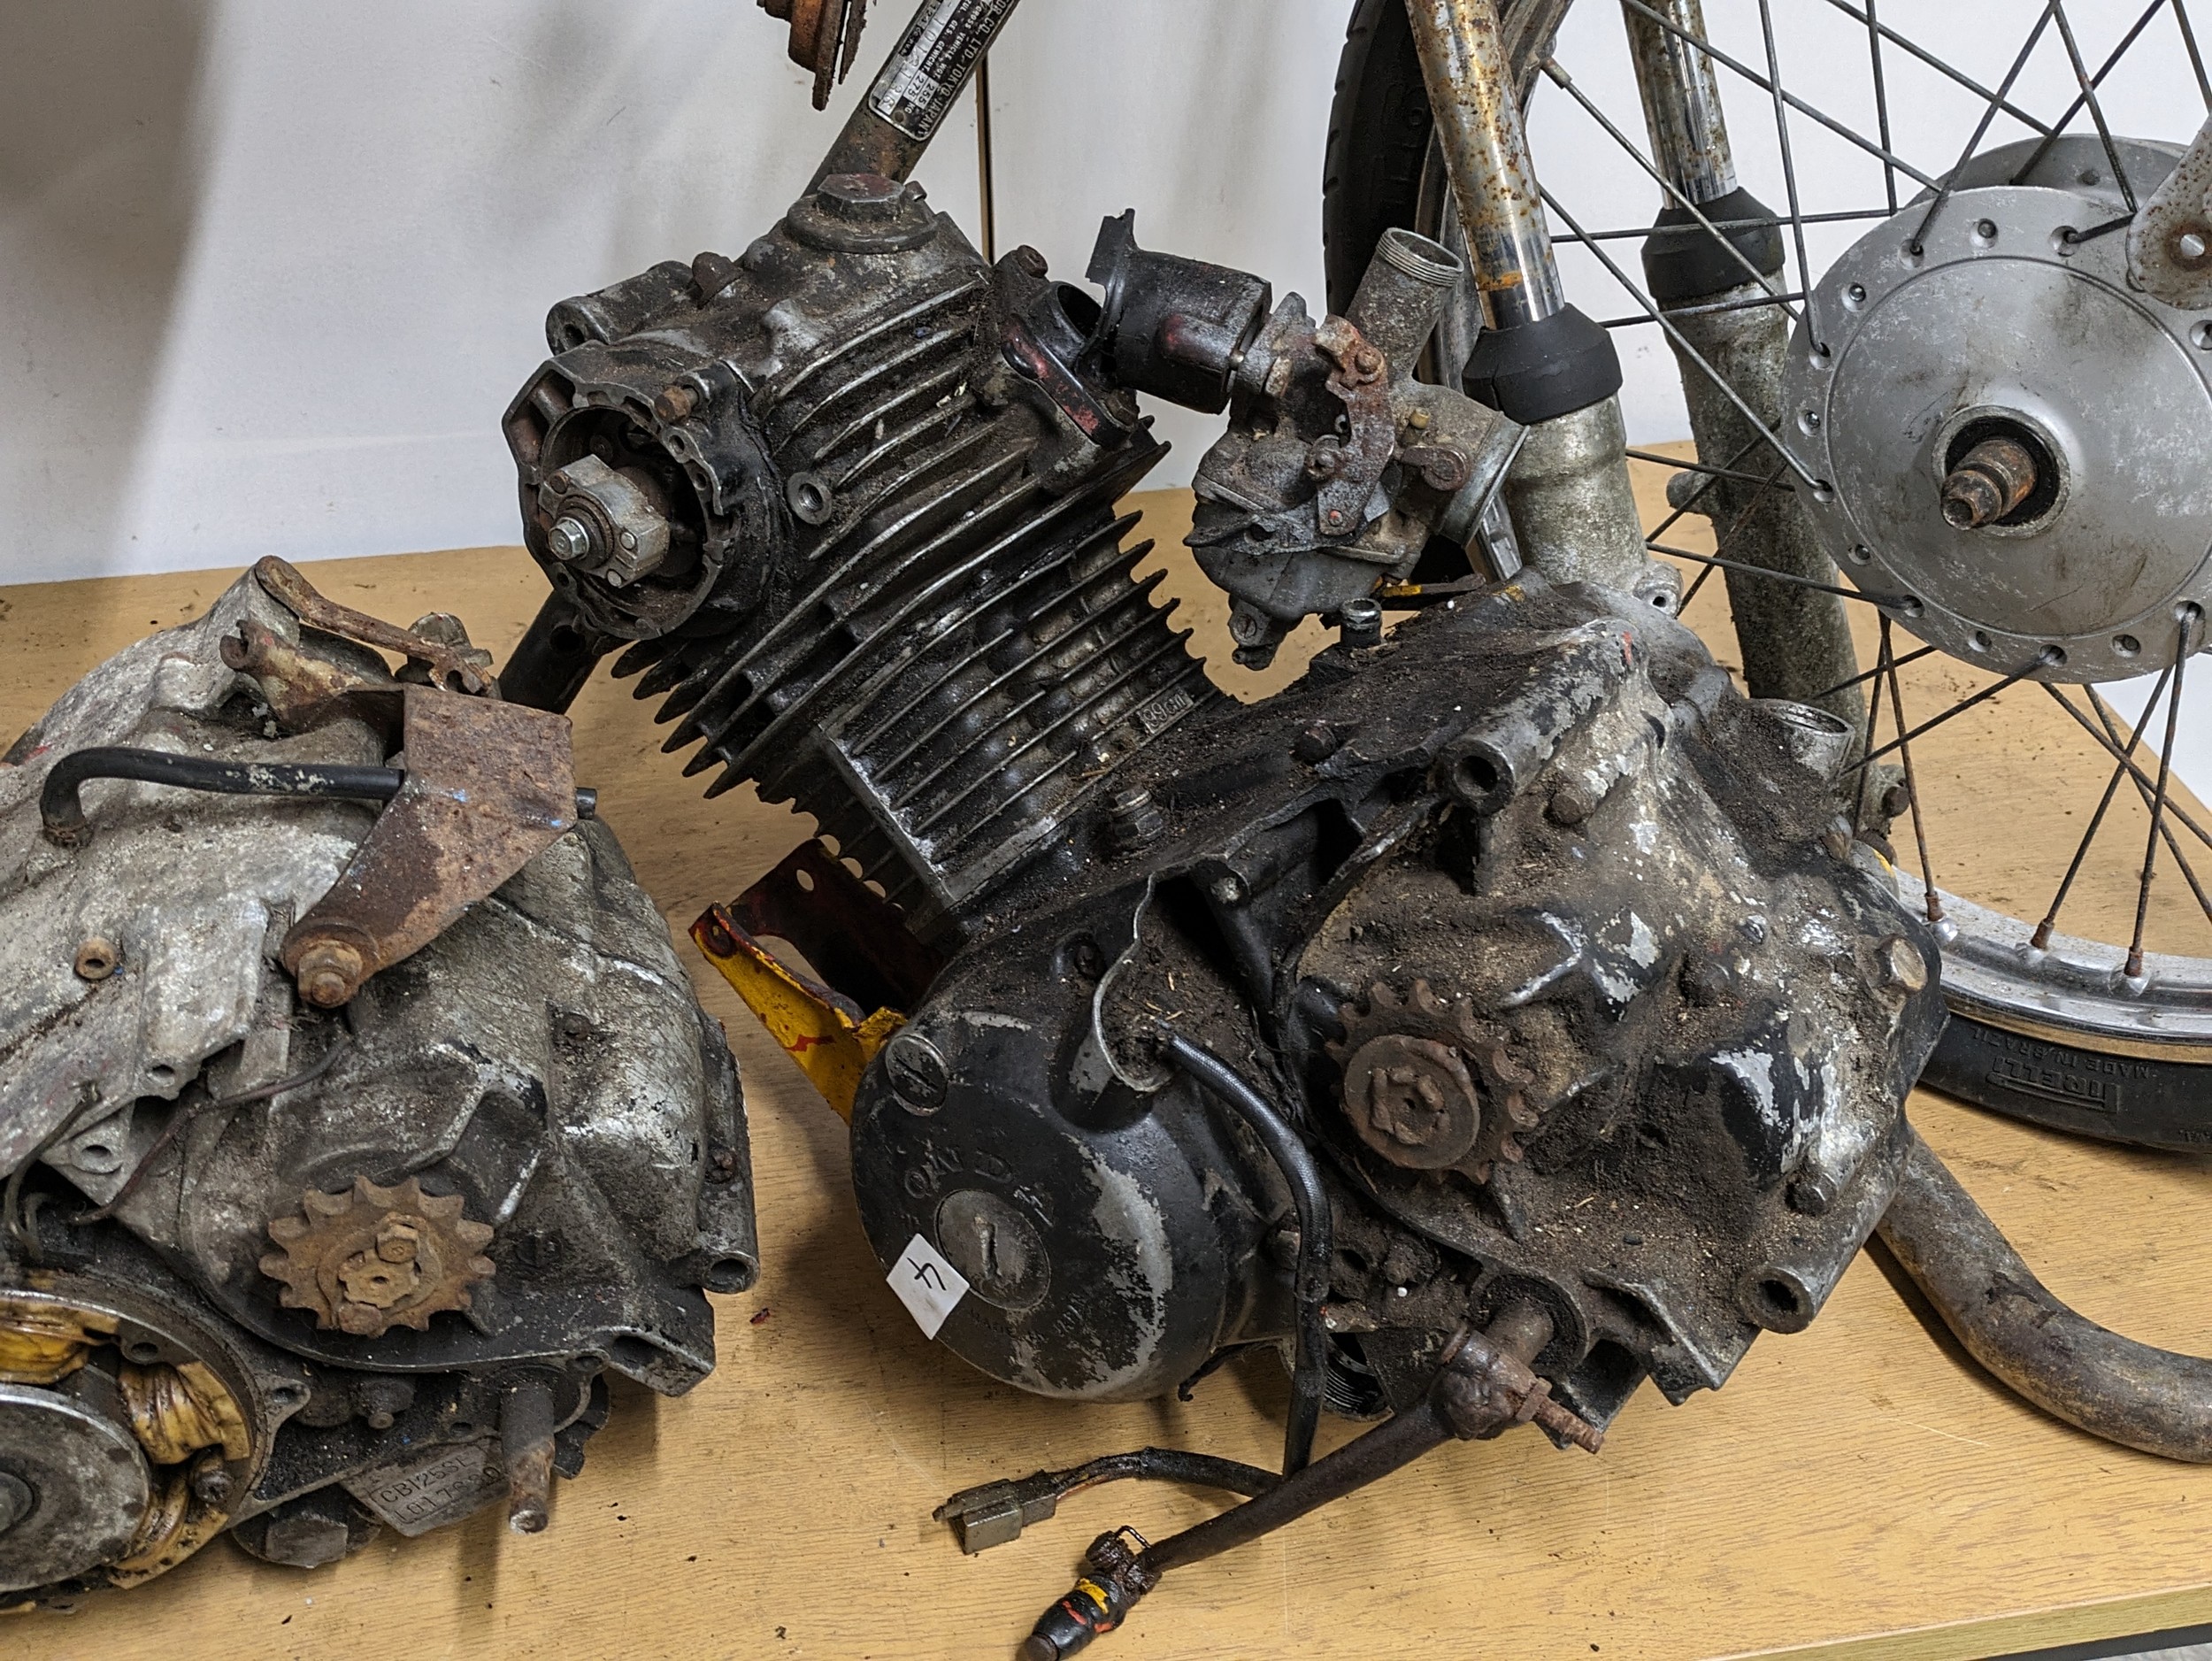 Honda CB125-S frame,3 engines and parts - Image 10 of 10